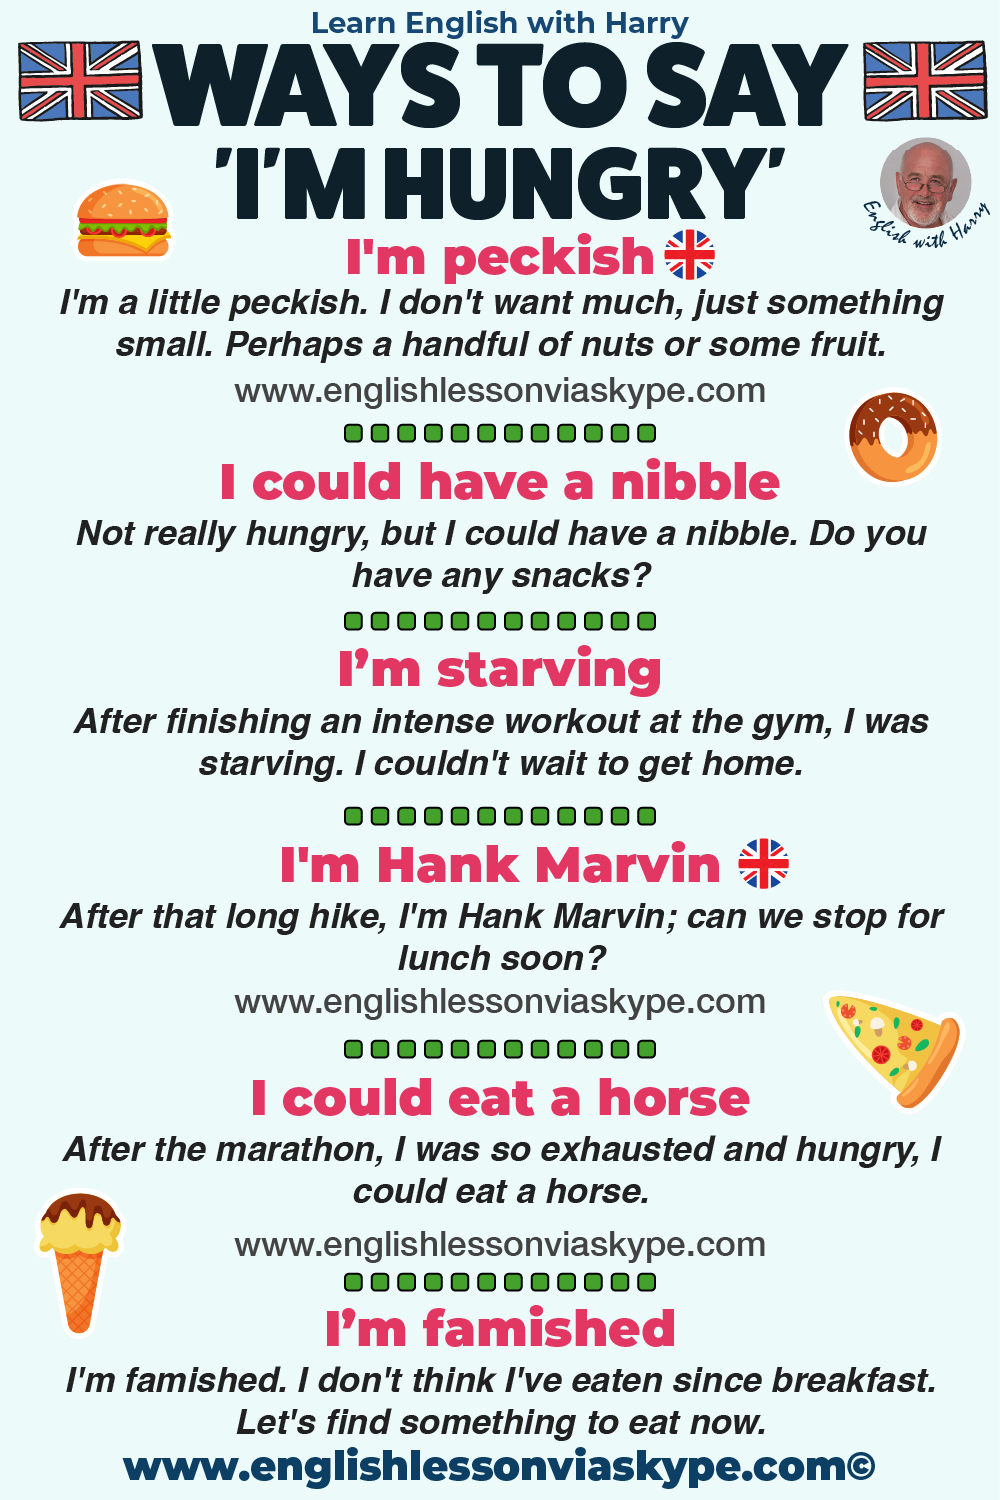 10 Ways To Say I’m Hungry in English. English speaking skills. Improve English speaking skills. Upgrade your vocabulary. English grammar rules. Improve English speaking. Advanced English lessons on Zoom and Skype. Improve English speaking and writing skills. #learnenglish